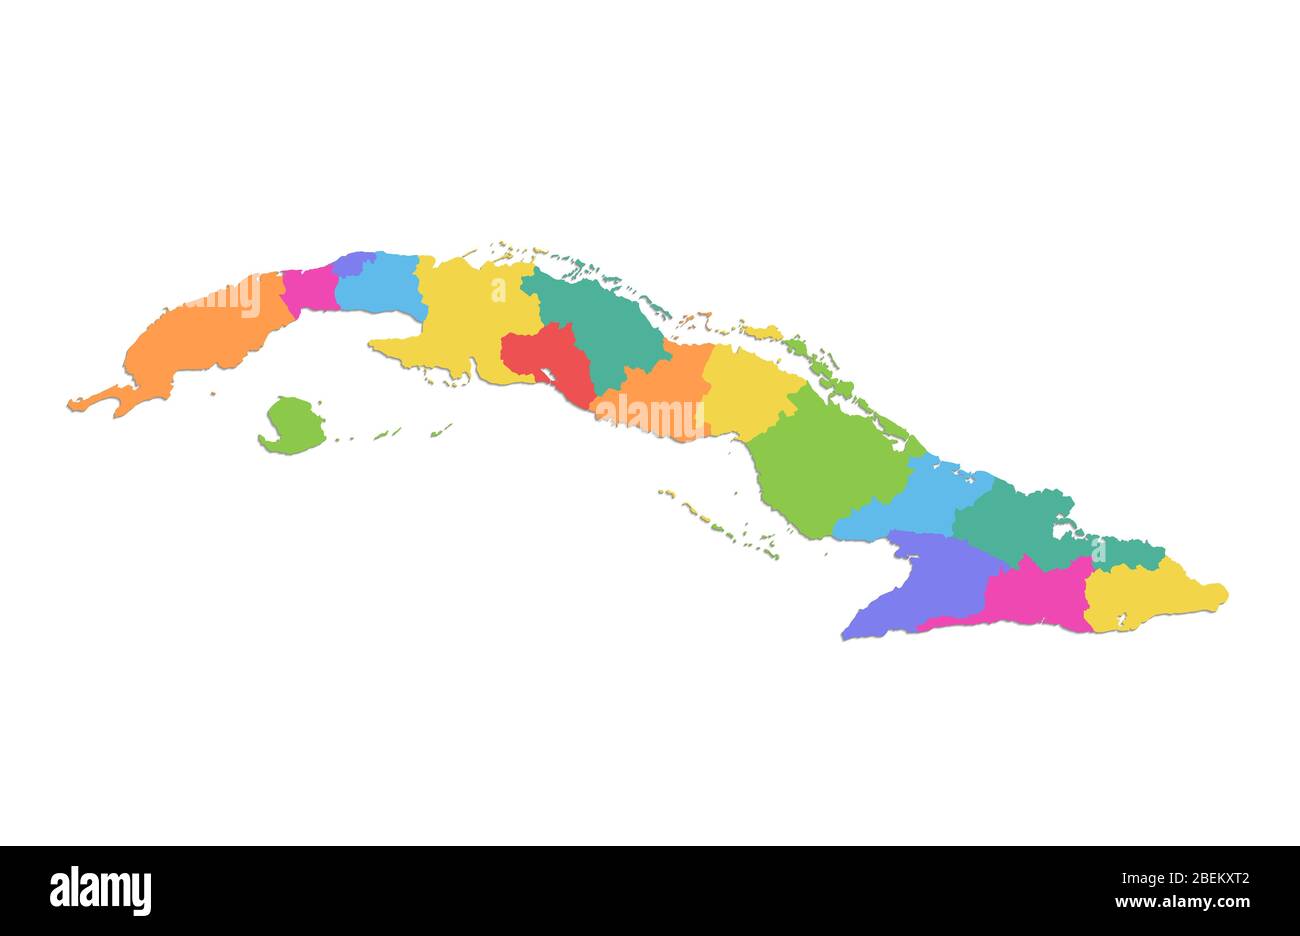 Cuba map, administrative division, colors map isolated on white background blank Stock Photo